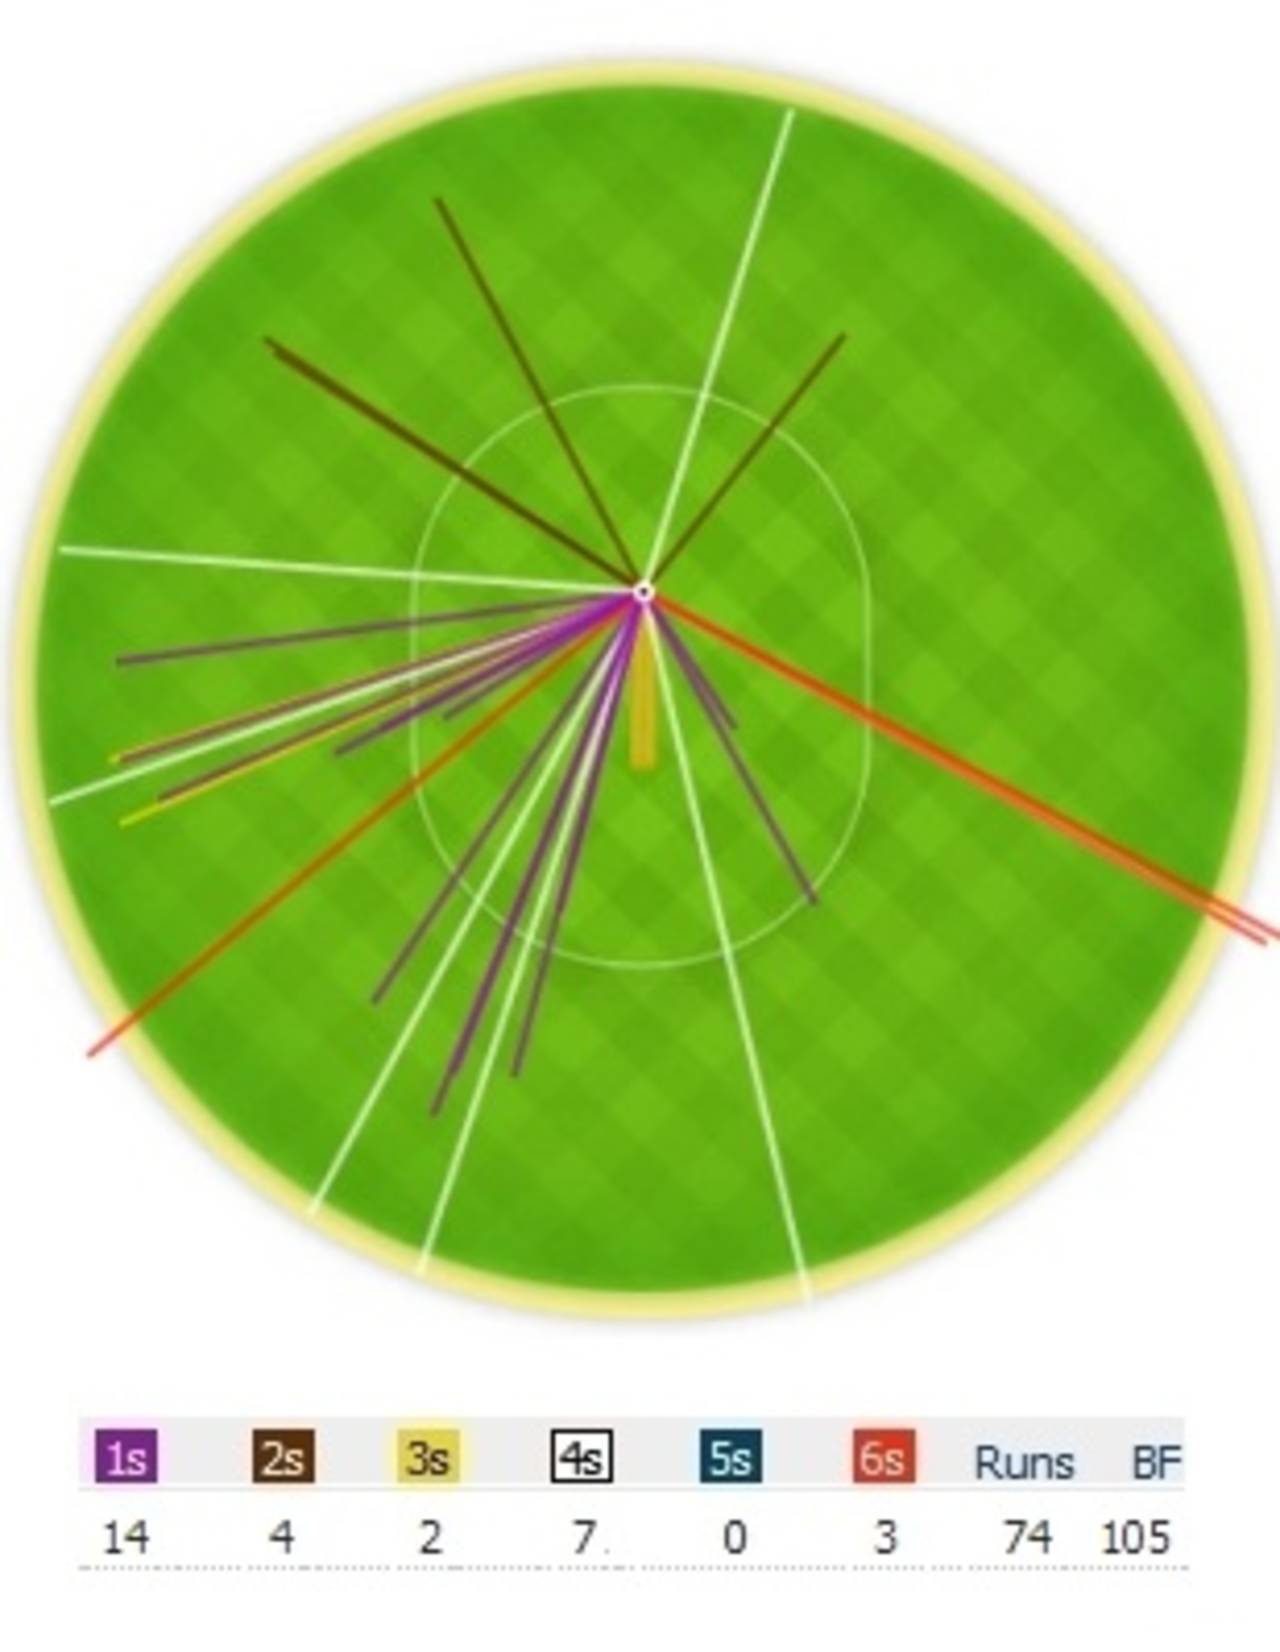 Kevin Pietersen started slowly against Pragyan Ojha, but by the end of his innings he had managed an impressive wagon-wheel against Ojha (Click <a href="/india-v-england-2012/engine/match/565807.html?view=hawkeye" target="_blank">here</a> for more Hawk-Eye graphs from the Test)&nbsp;&nbsp;&bull;&nbsp;&nbsp;ESPNcricinfo Ltd